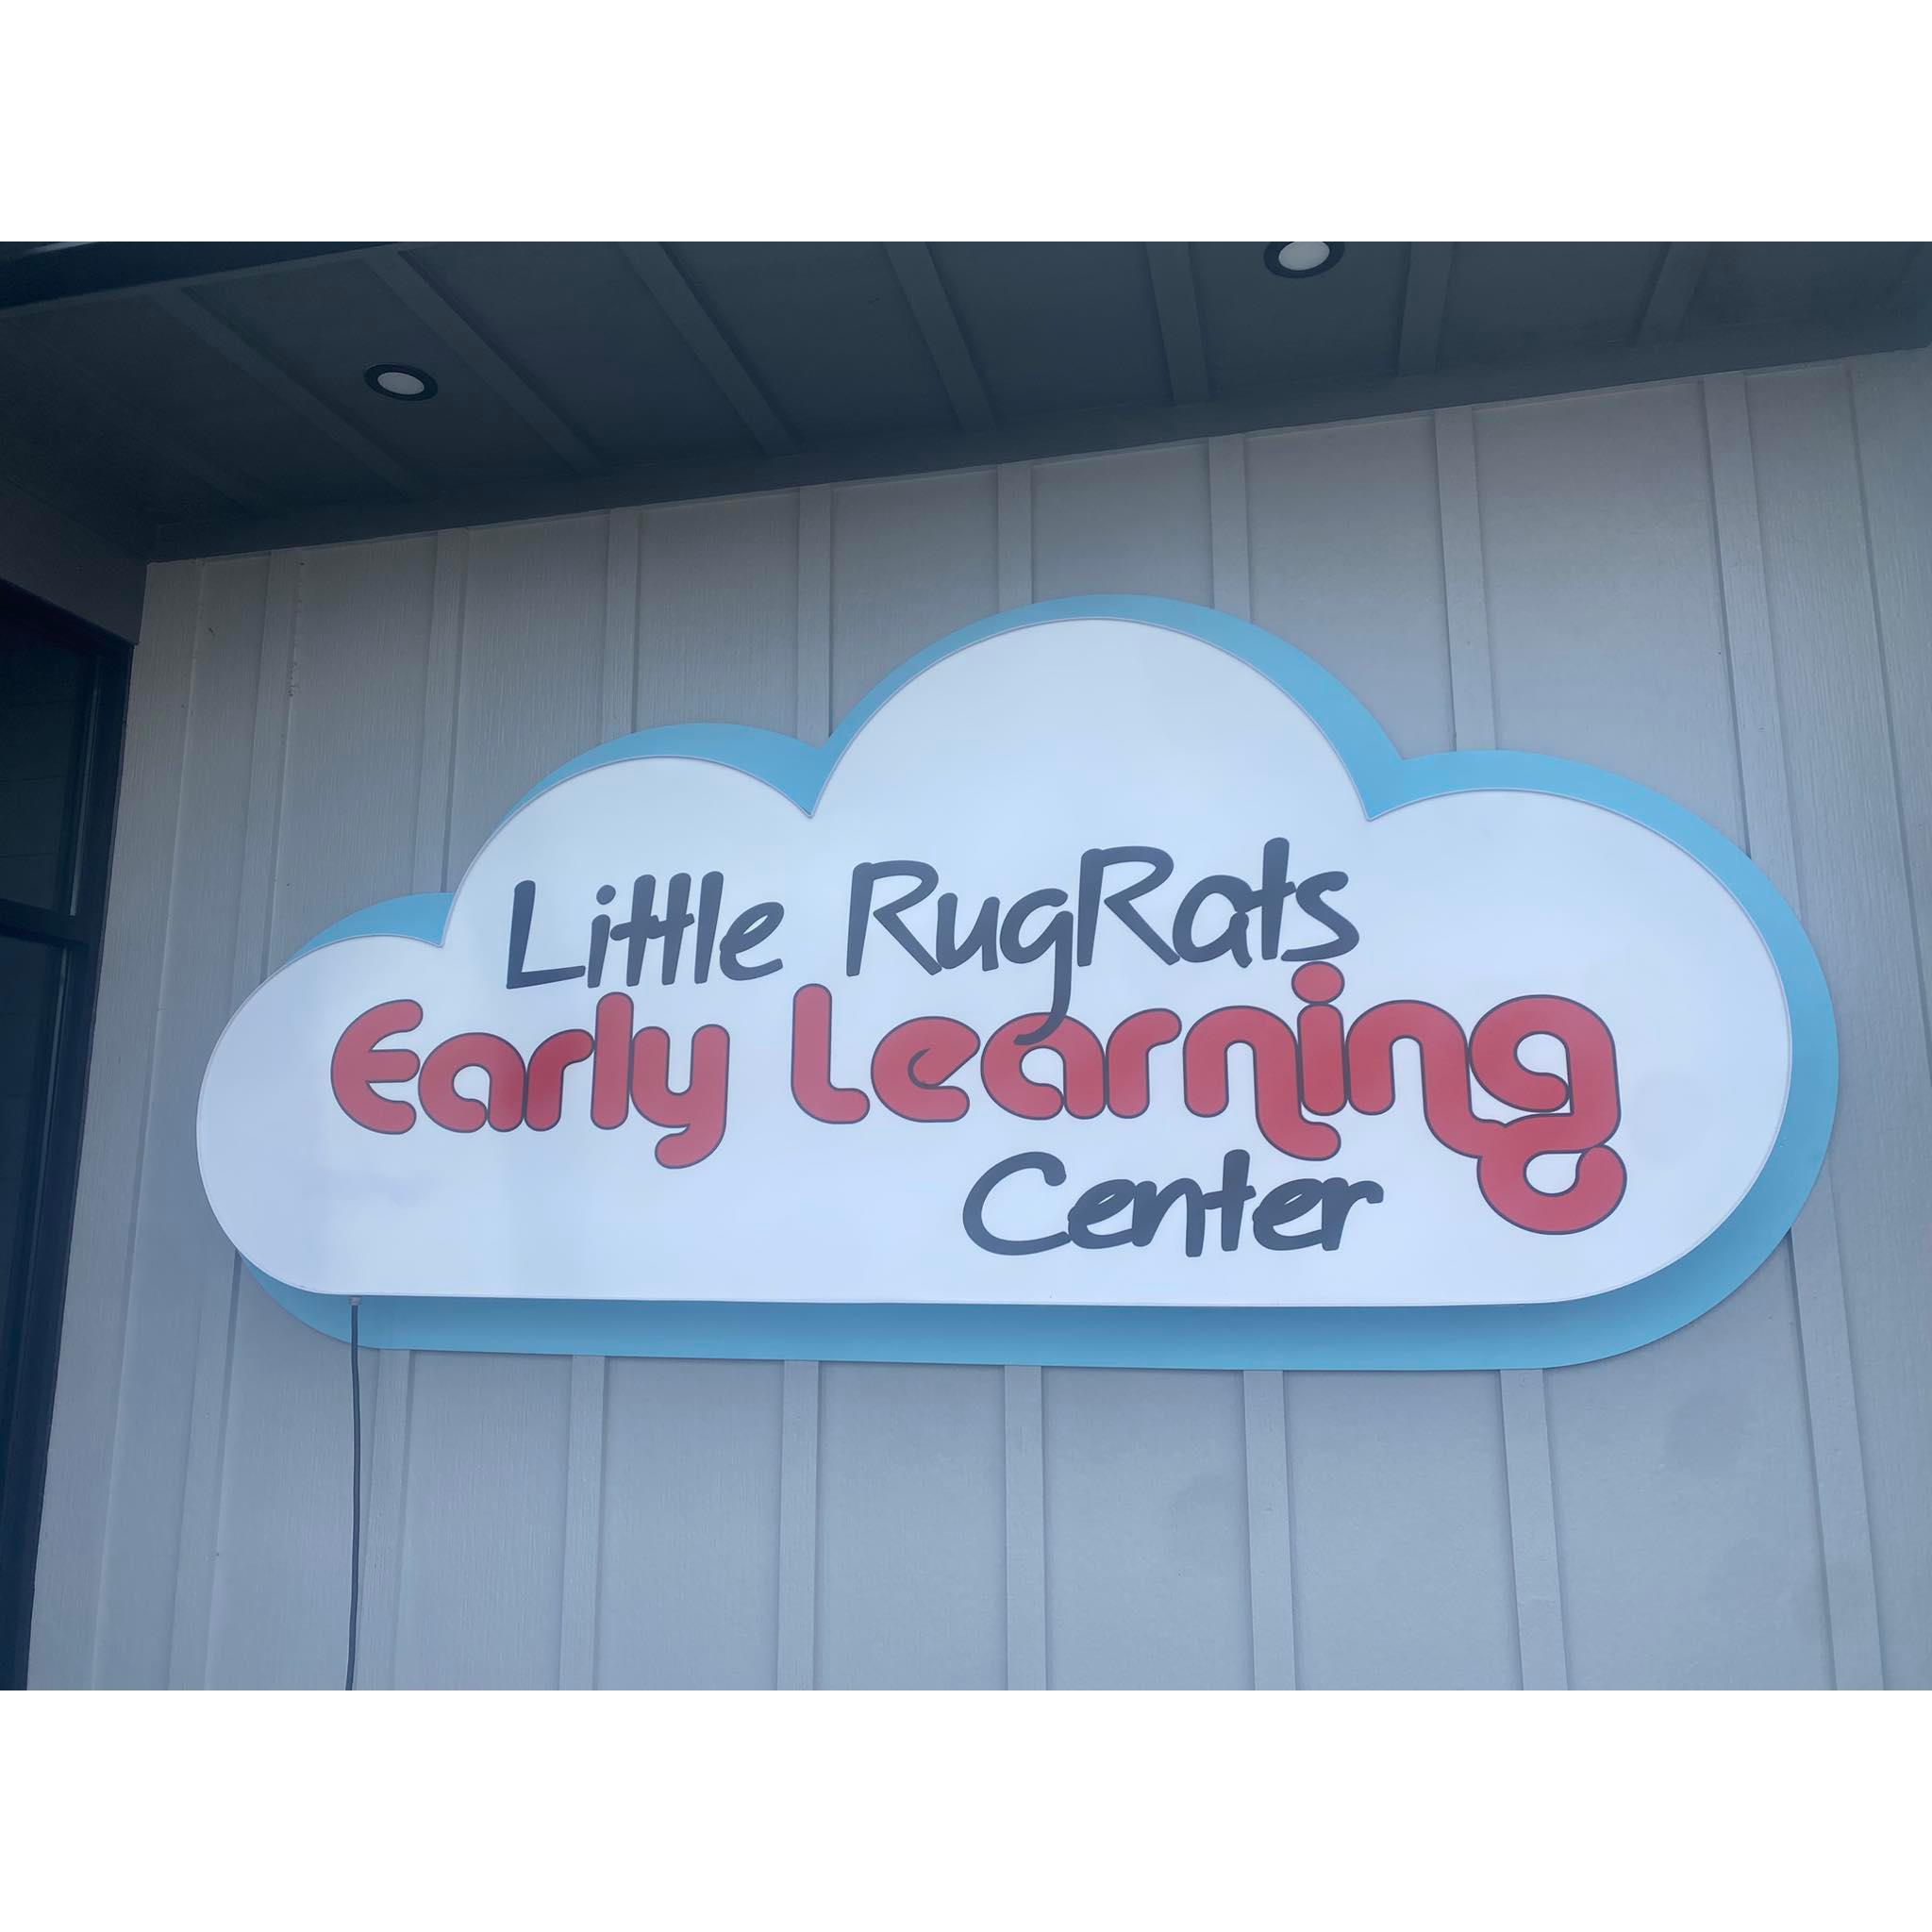 Little Rugrats Early Learning Center - Kokomo, IN 46902 - (765)860-1879 | ShowMeLocal.com